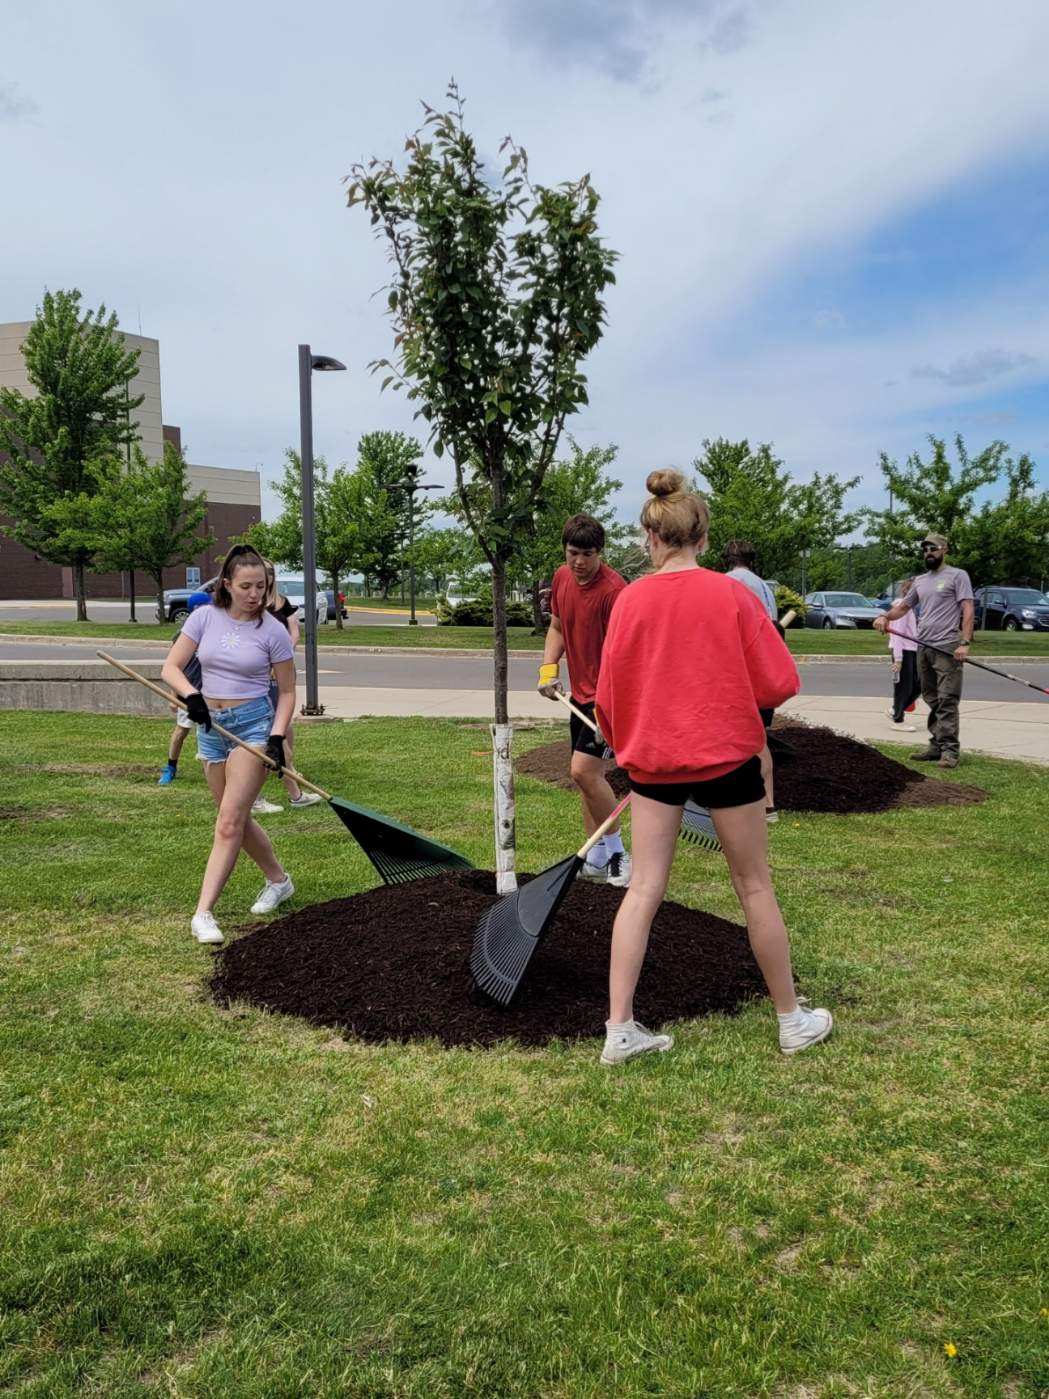 Cherry trees planted in honor of slain students | Oxford Leader